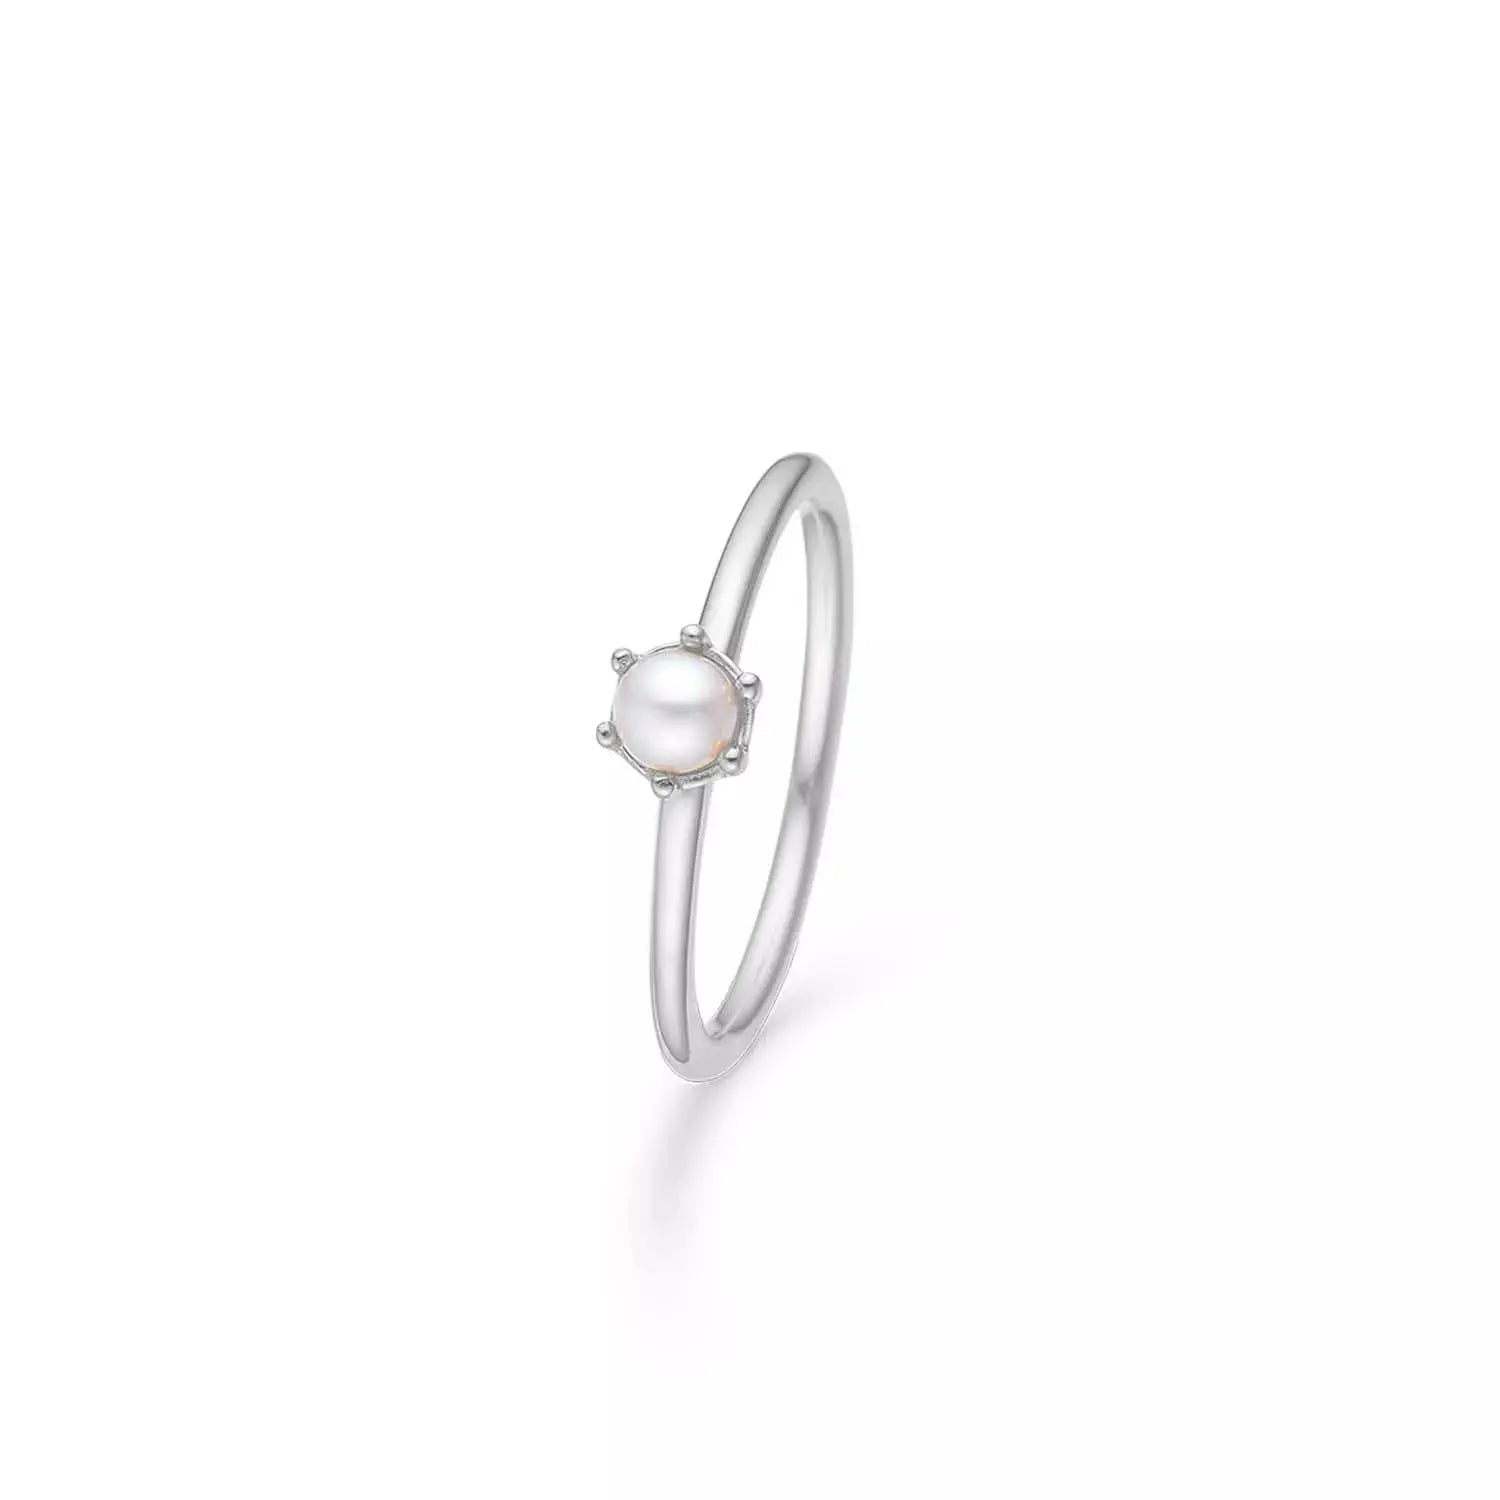 Poetry Solitaire Pearl Ring - Sølv fra Mads Z Silver Label